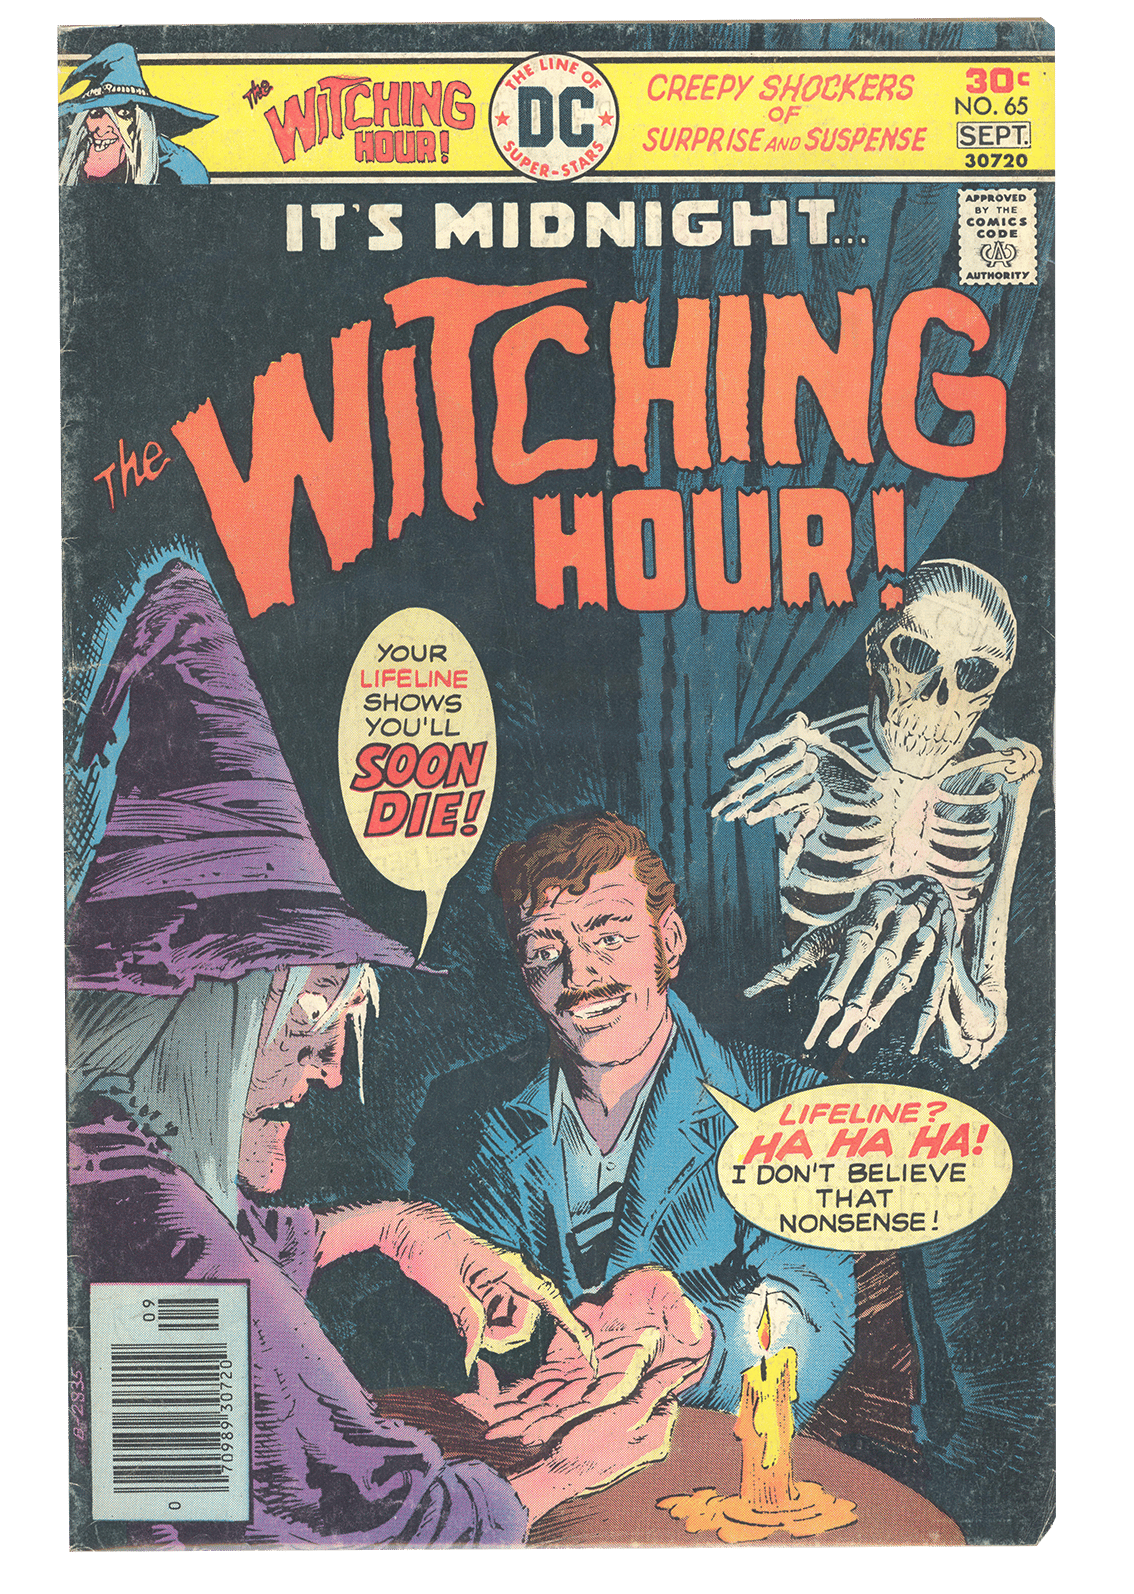 the witching hour book